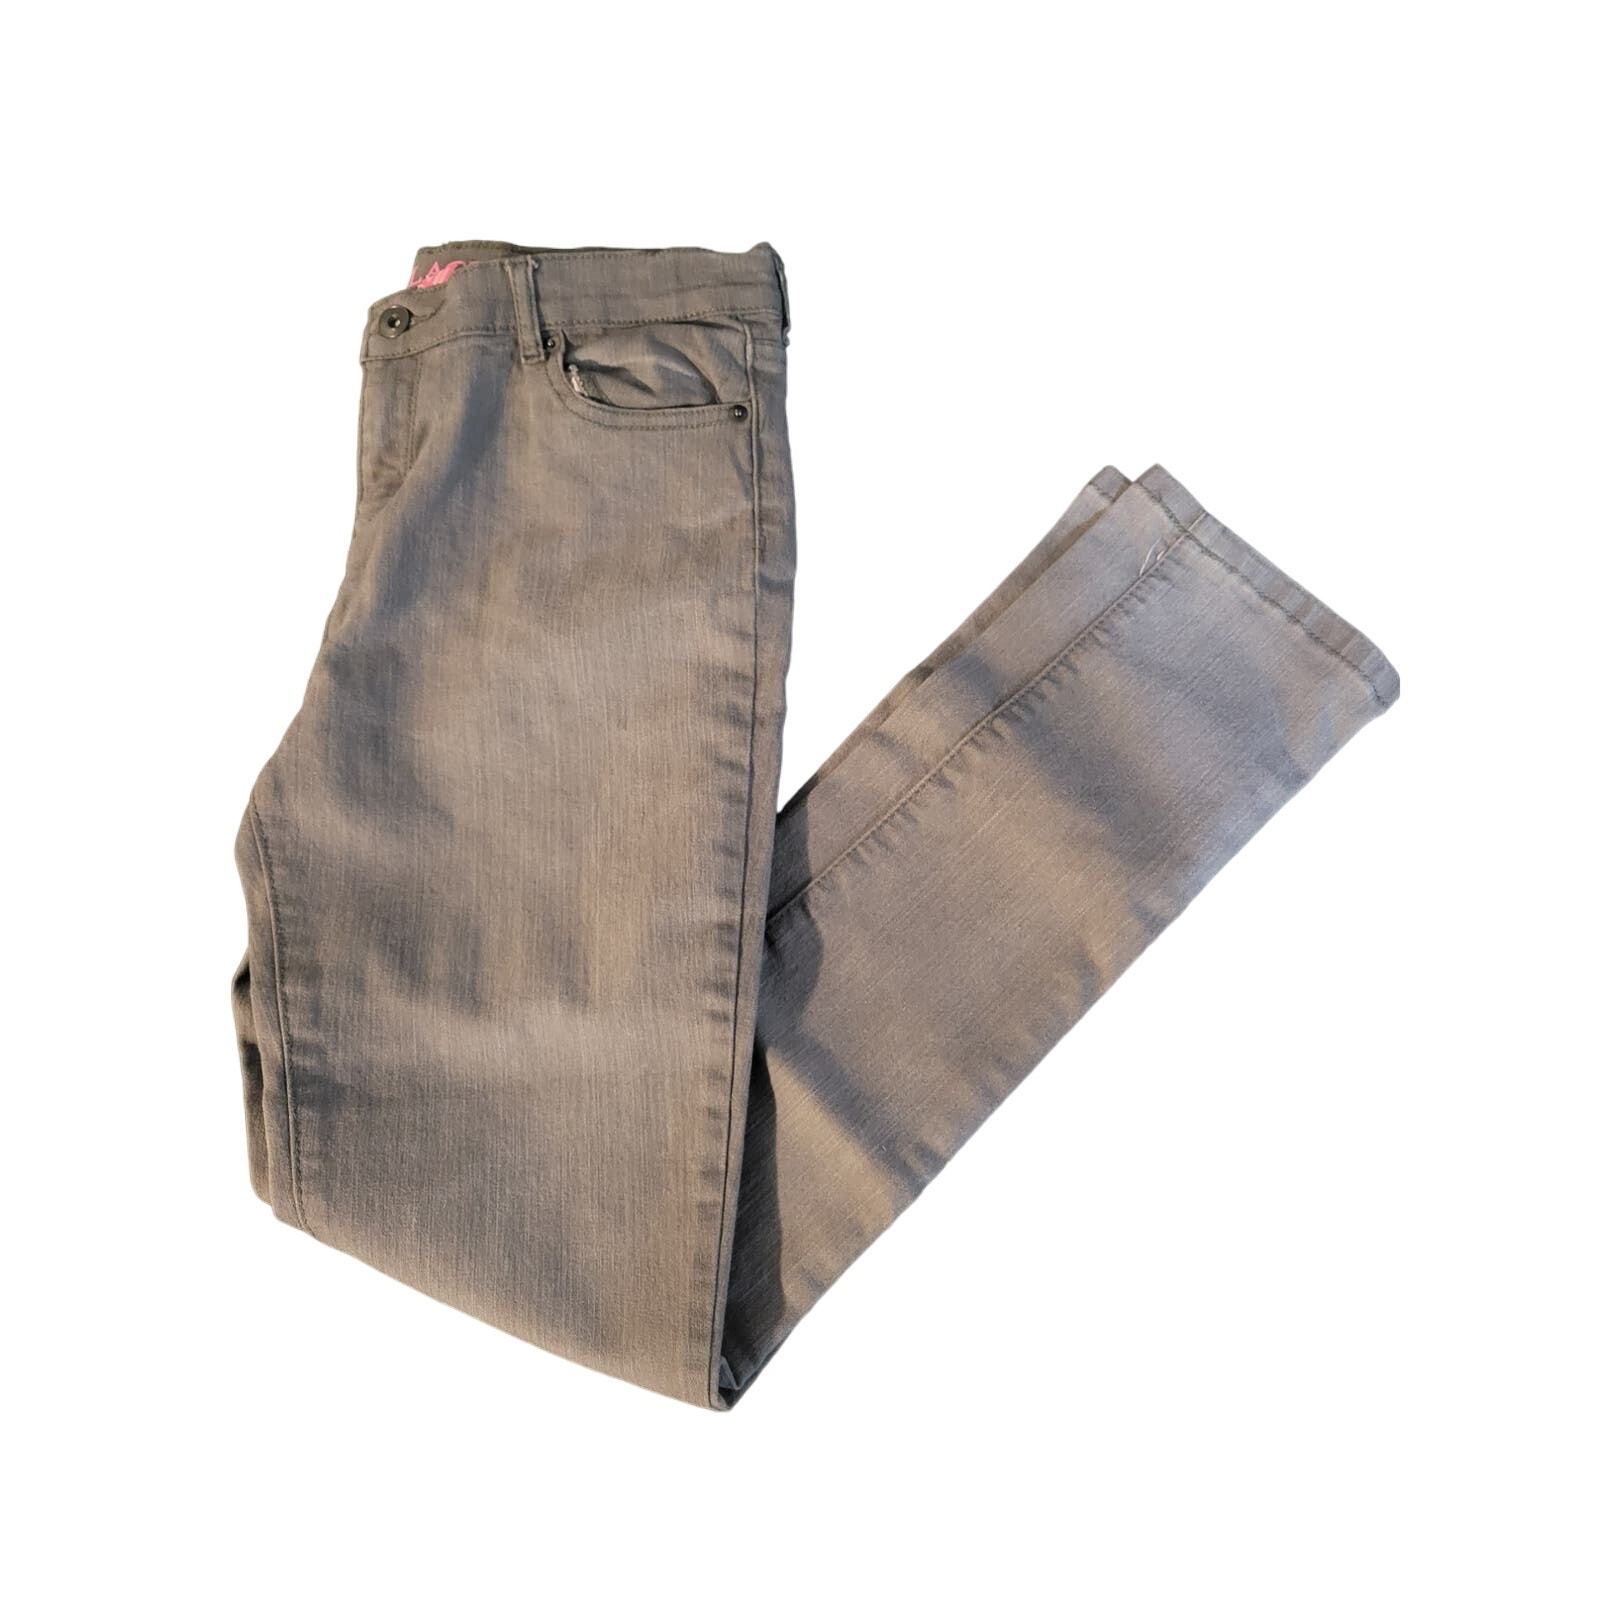 Children's Place Super Skinny Size 16 Gray Jeans - $7.00